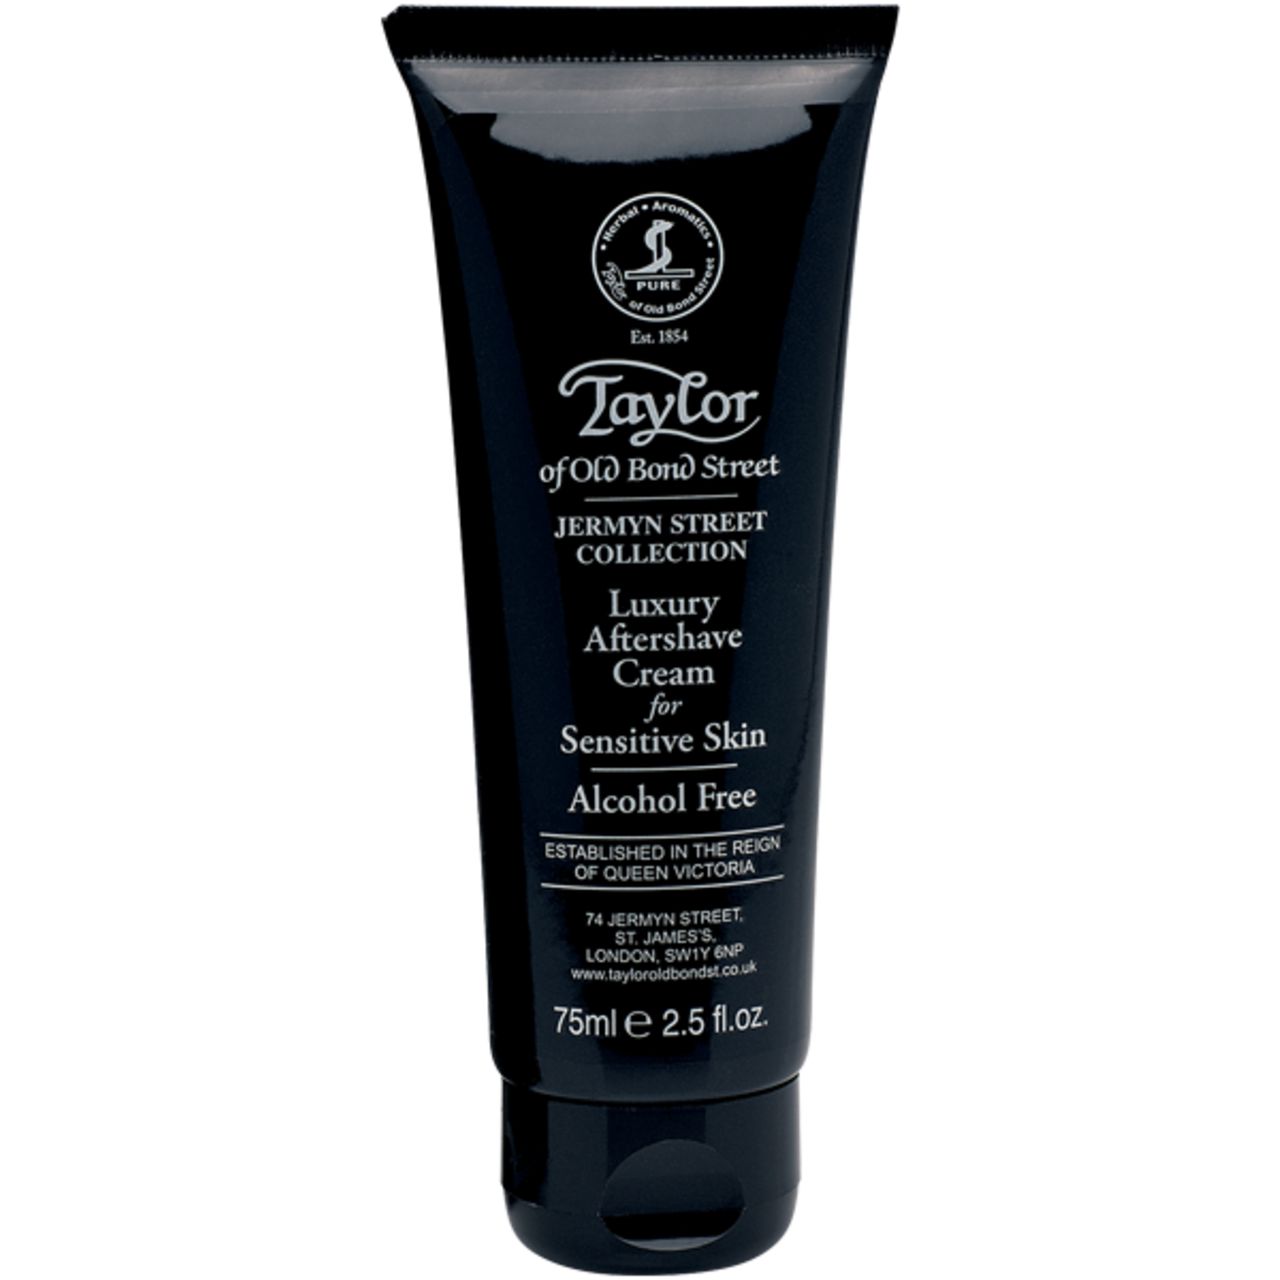 Taylor of Old Bond Street, Jermyn Street Collection Luxury Aftershave Cream for sensitive Skin